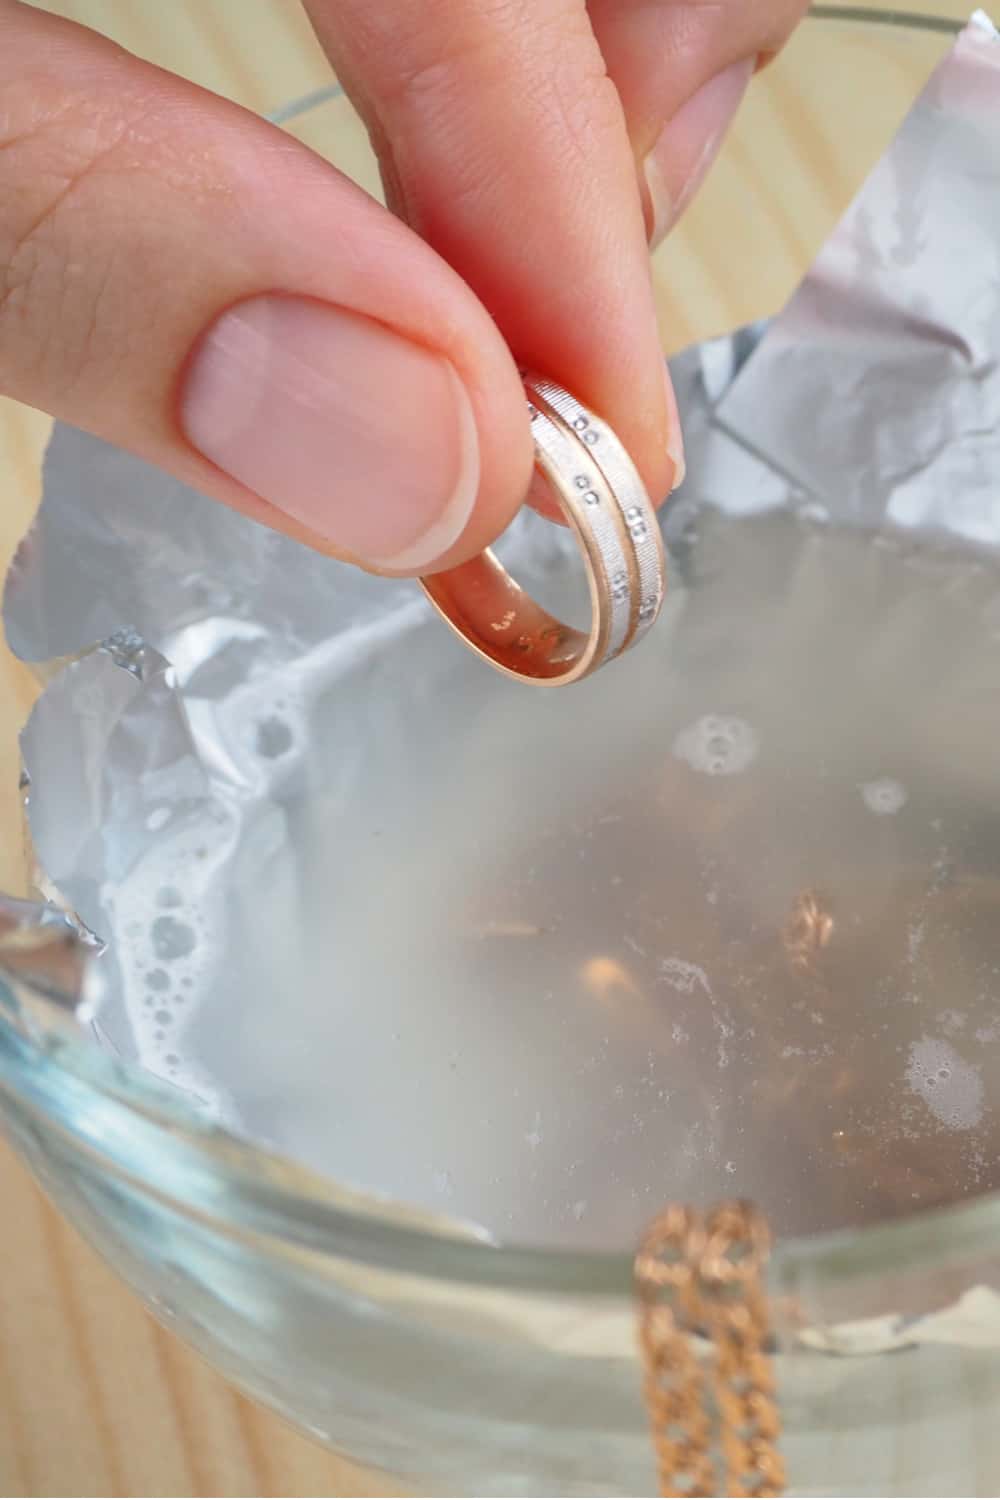 How to Clean Gold rings